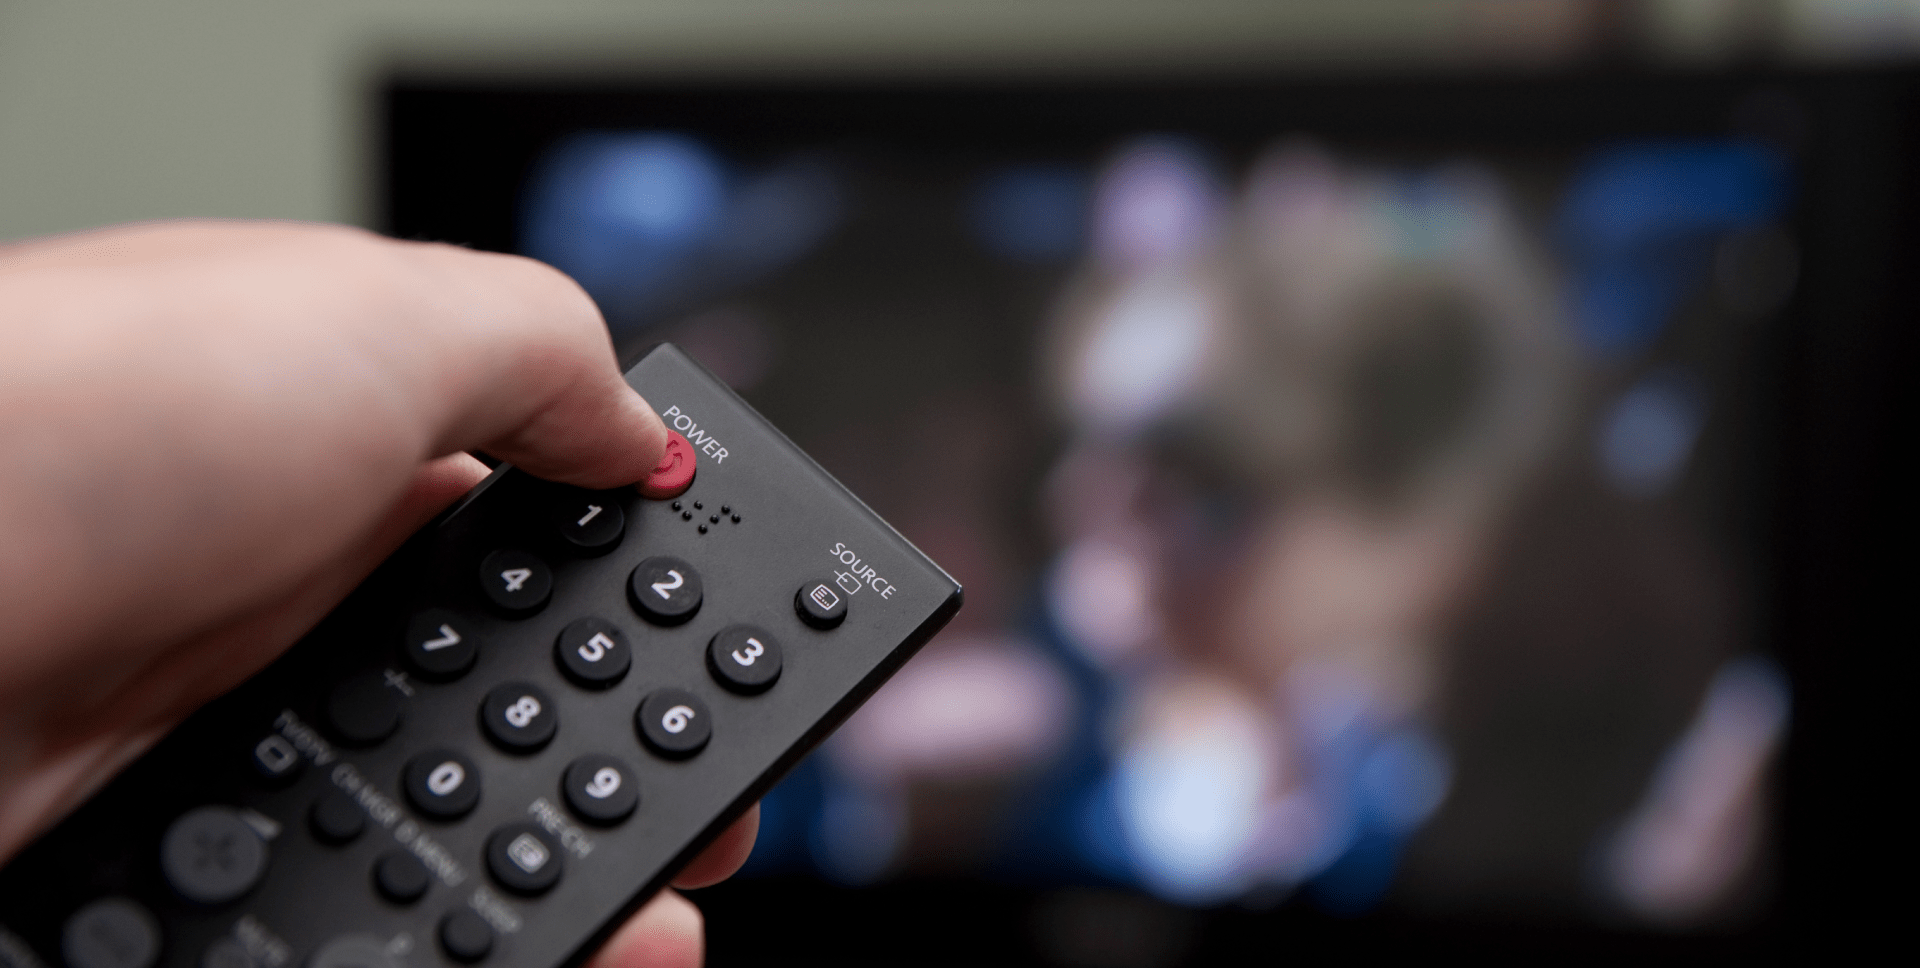 A hand pointing a remote at the TV and pressing the power button